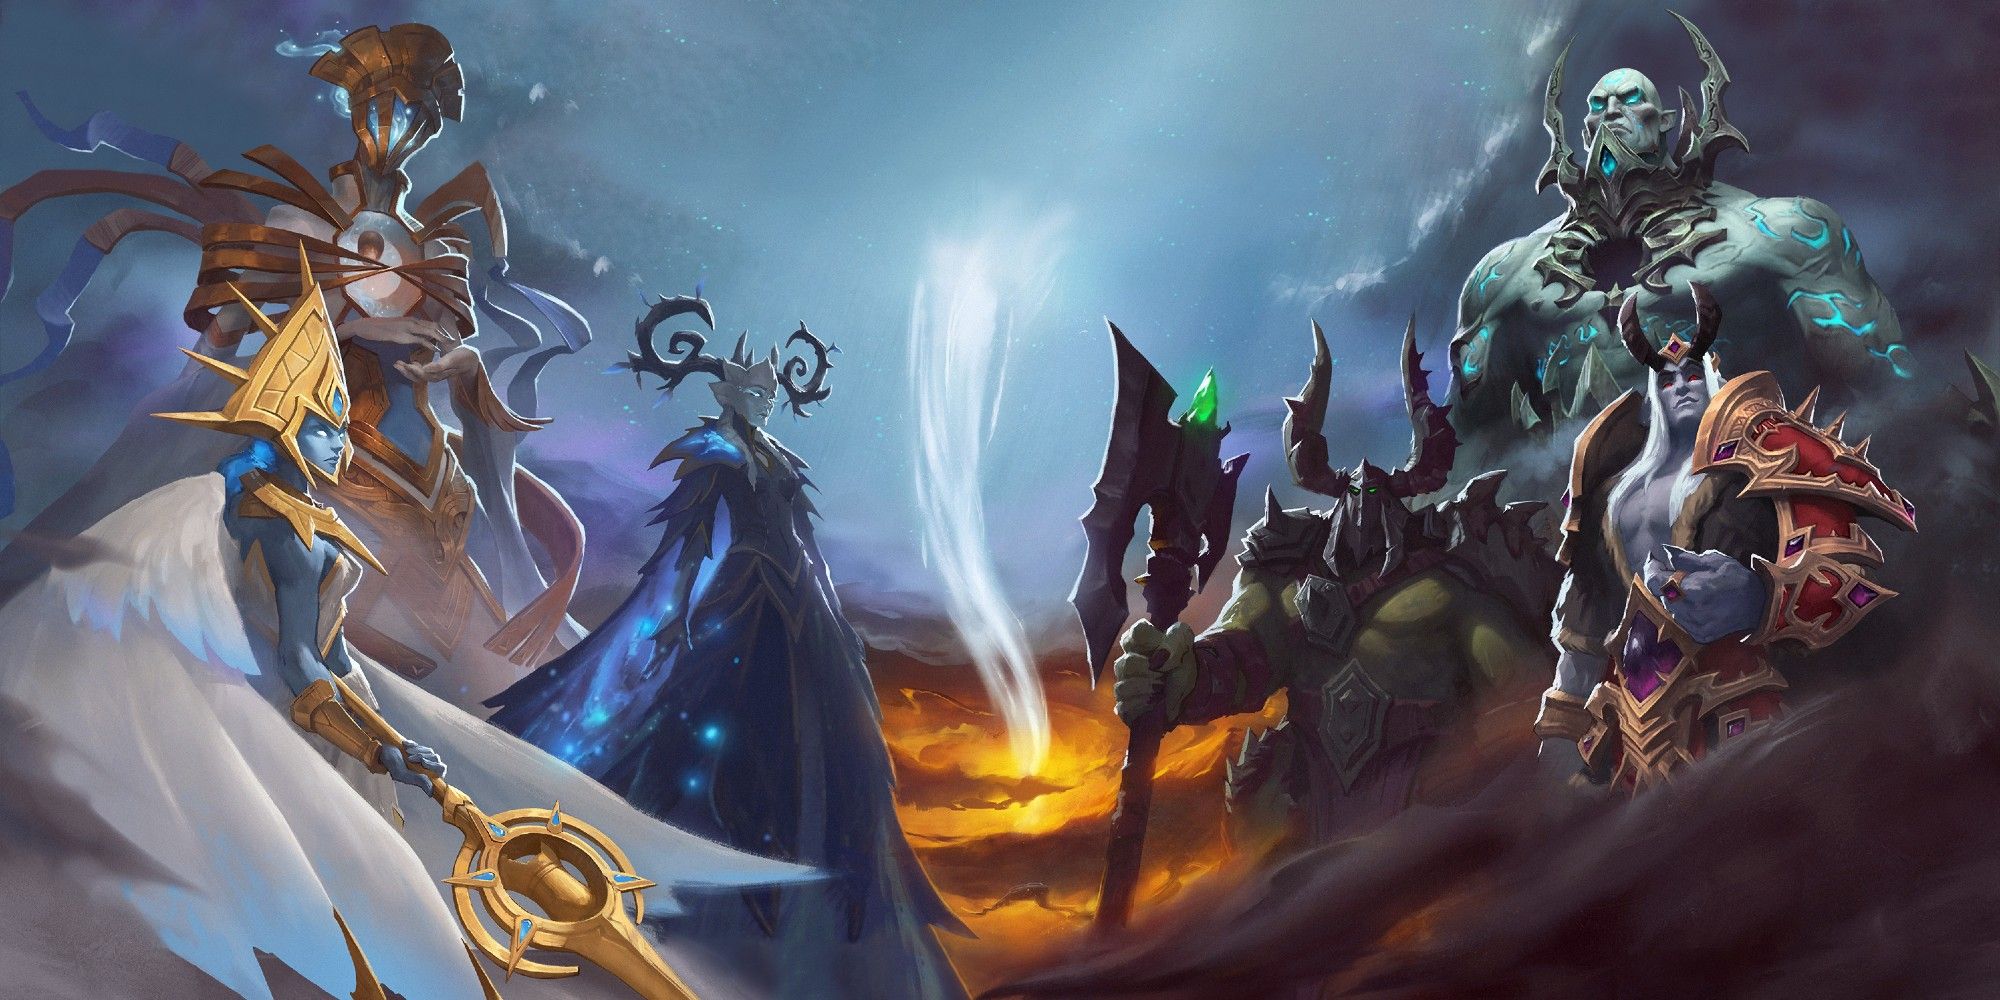 The main factions in the afterlife of World of Warcraft: Shadowlands, represented by the leader of the Covenants